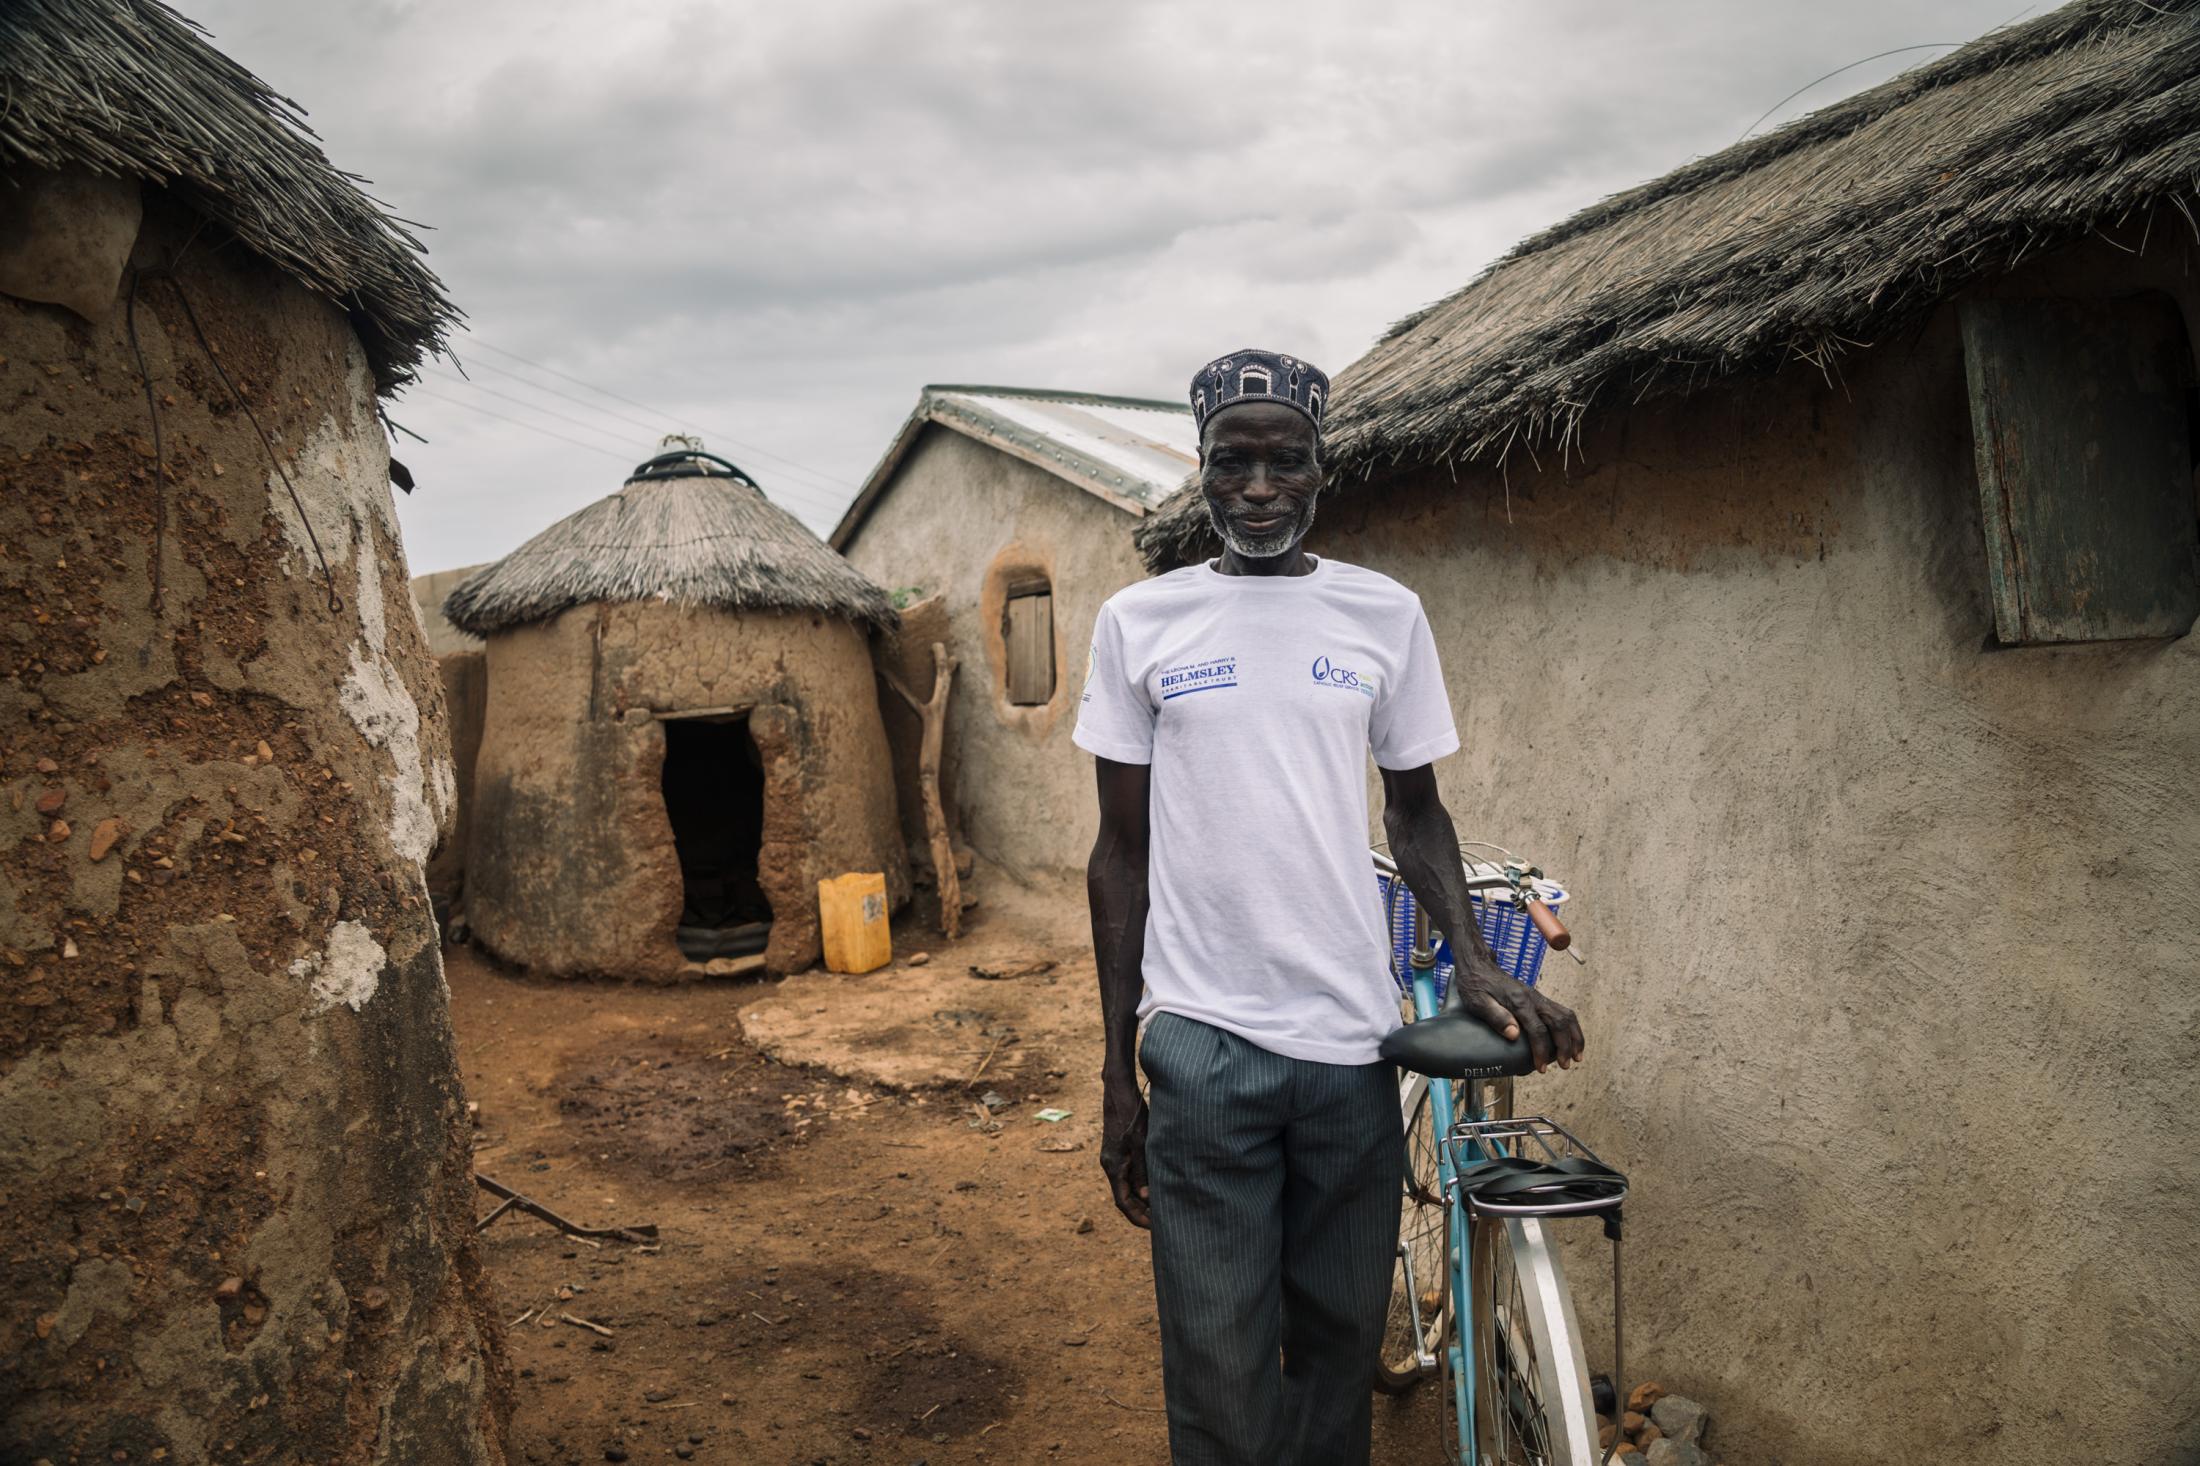 Samson Duun (68) CRS Community Volunteer in Gaare Community stands in the compound of his house in Gaare, Northern Ghana on June 19, 2020....